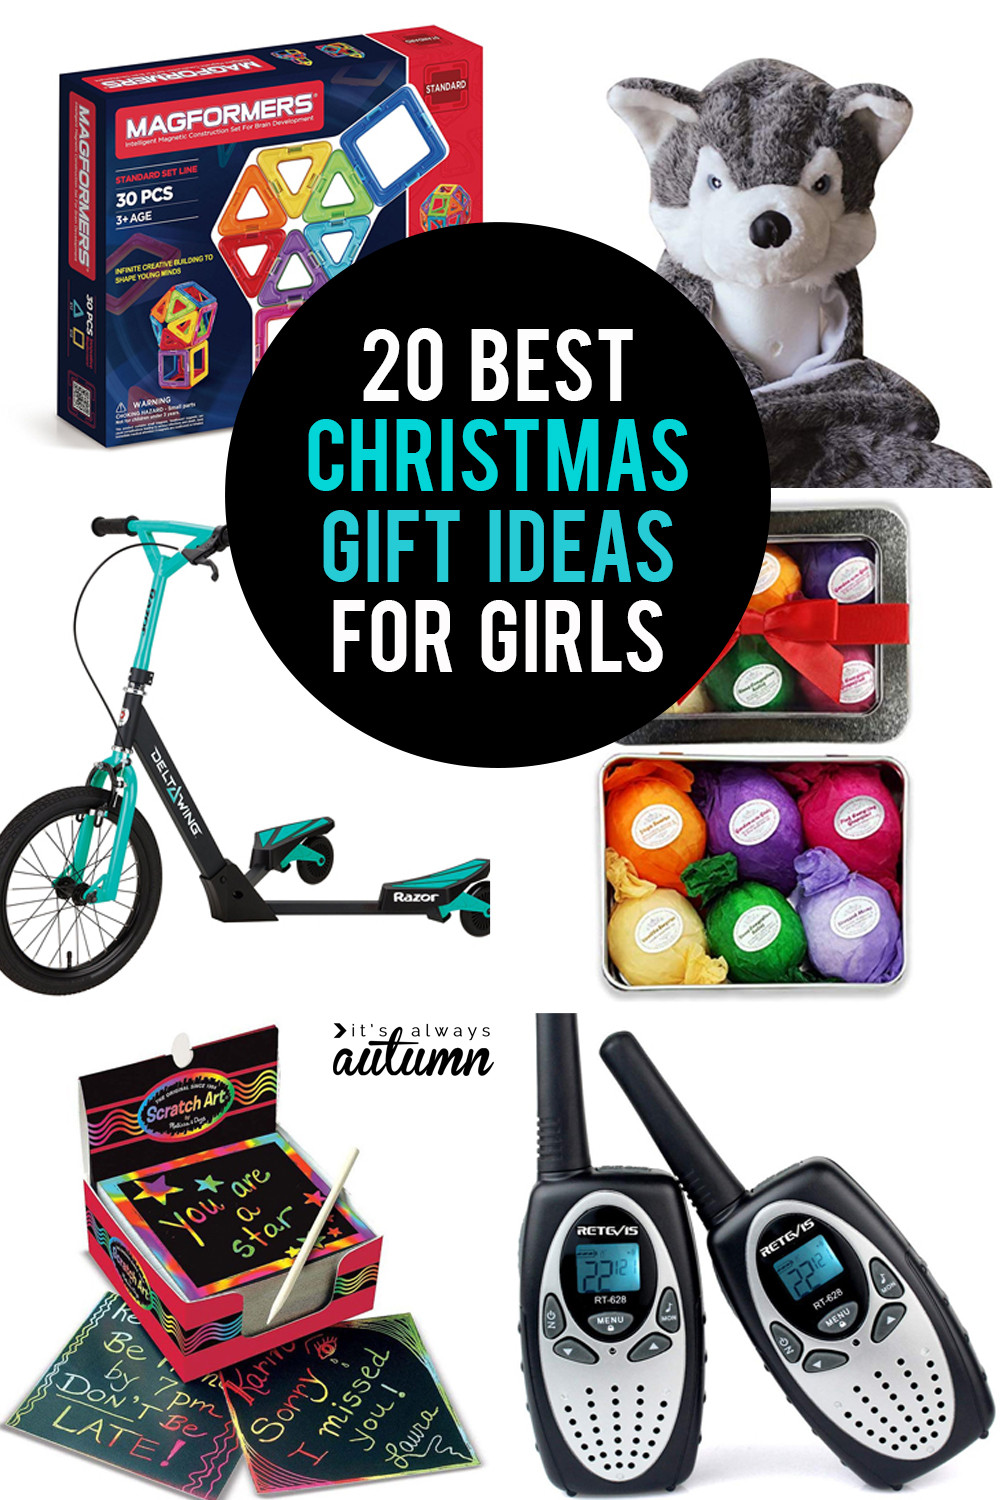 Cool Christmas Gifts For Girls
 The 20 best Christmas ts for girls It s Always Autumn